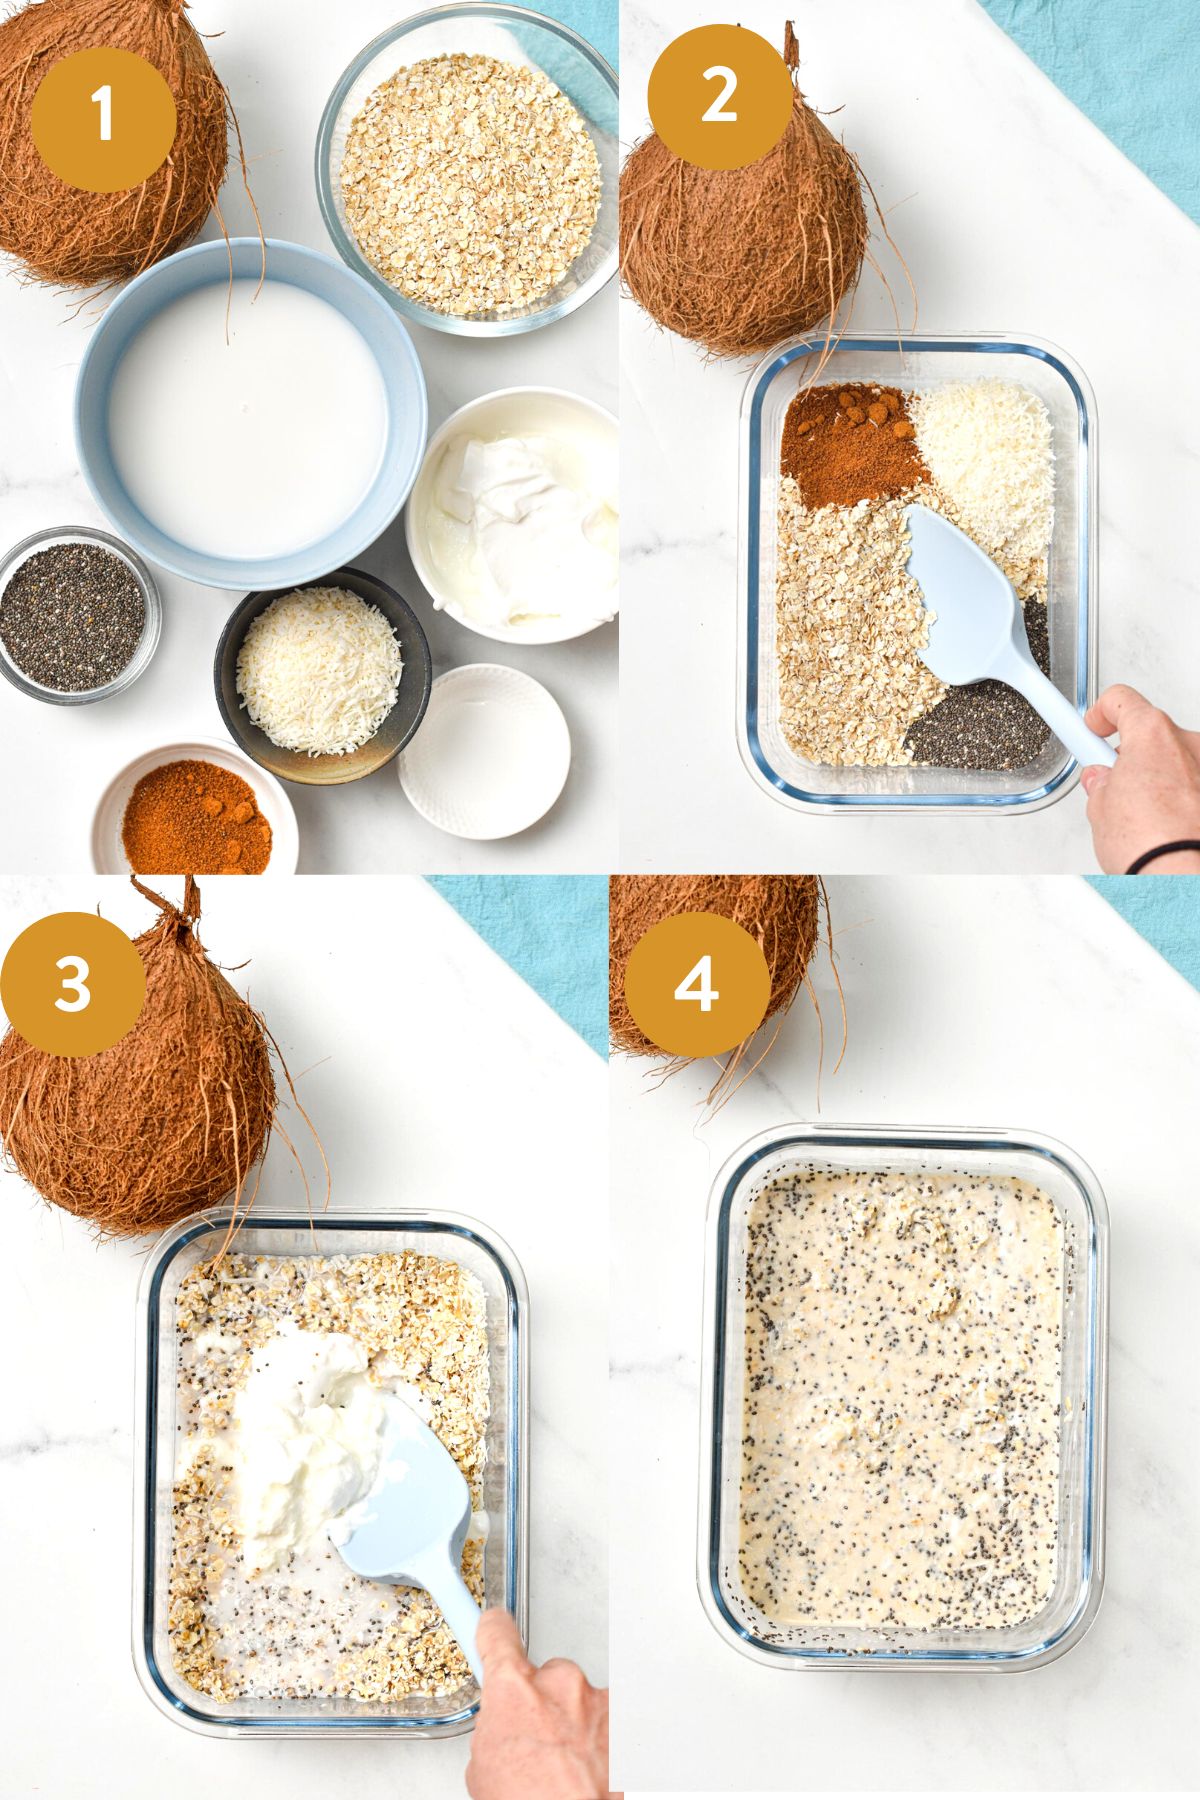 This Coconut overnight oats recipe is a quick and easy healthy breakfast to meal prep for your busy morning week. Plus, it's dairy-free, gluten-free, and packed with coconut flavors.